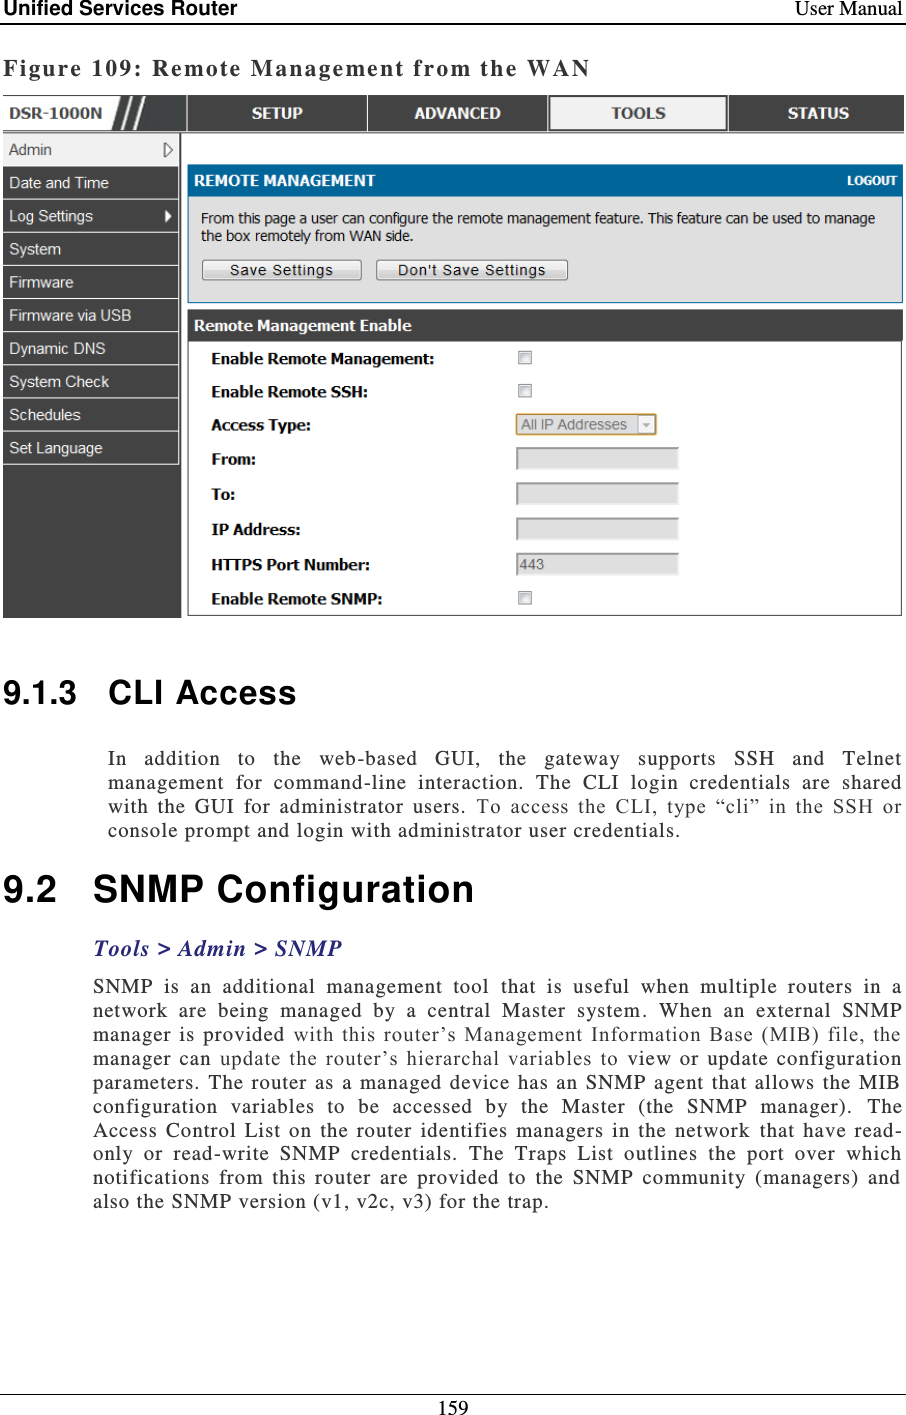 Unified Services Router    User Manual 159  Figure 109:  Re mote Manage ment from the WAN    9.1.3  CLI Access In  addition  to  the  web-based  GUI,  the  gateway  supports  SSH  and  Telnet management  for  command-line  interaction.  The  CLI  login  credentials  are  shared with  the  GUI  for  administrator  users.  To  access  the  CLI,  type  “cli”  in  the  SSH  or console prompt and login with administrator user credentials.  9.2  SNMP Configuration Tools &gt; Admin &gt; SNMP  SNMP  is  an  additional  management  tool  that  is  useful  when  multiple  routers  in  a network  are  being  managed  by  a  central  Master  system .  When  an  external  SNMP manager is  provided  with  this  router’s  Management  Information  Base (MIB)  file,  the manager  can  update  the  router’s  hierarchal  variables  to  view  or  update  configuration parameters.  The router as  a  managed device has an  SNMP  agent that  allows  the  MIB configuration  variables  to  be  accessed  by  the  Master  (the  SNMP  manager).   The Access  Control  List  on  the  router  identifies  managers  in  the  network  that  have  read-only  or  read-write  SNMP  credentials.  The  Traps  List  outlines  the  port  over  which notifications  from  this  router  are  provided  to  the  SNMP  community  (managers)  and also the SNMP version (v1, v2c, v3) for the trap.   